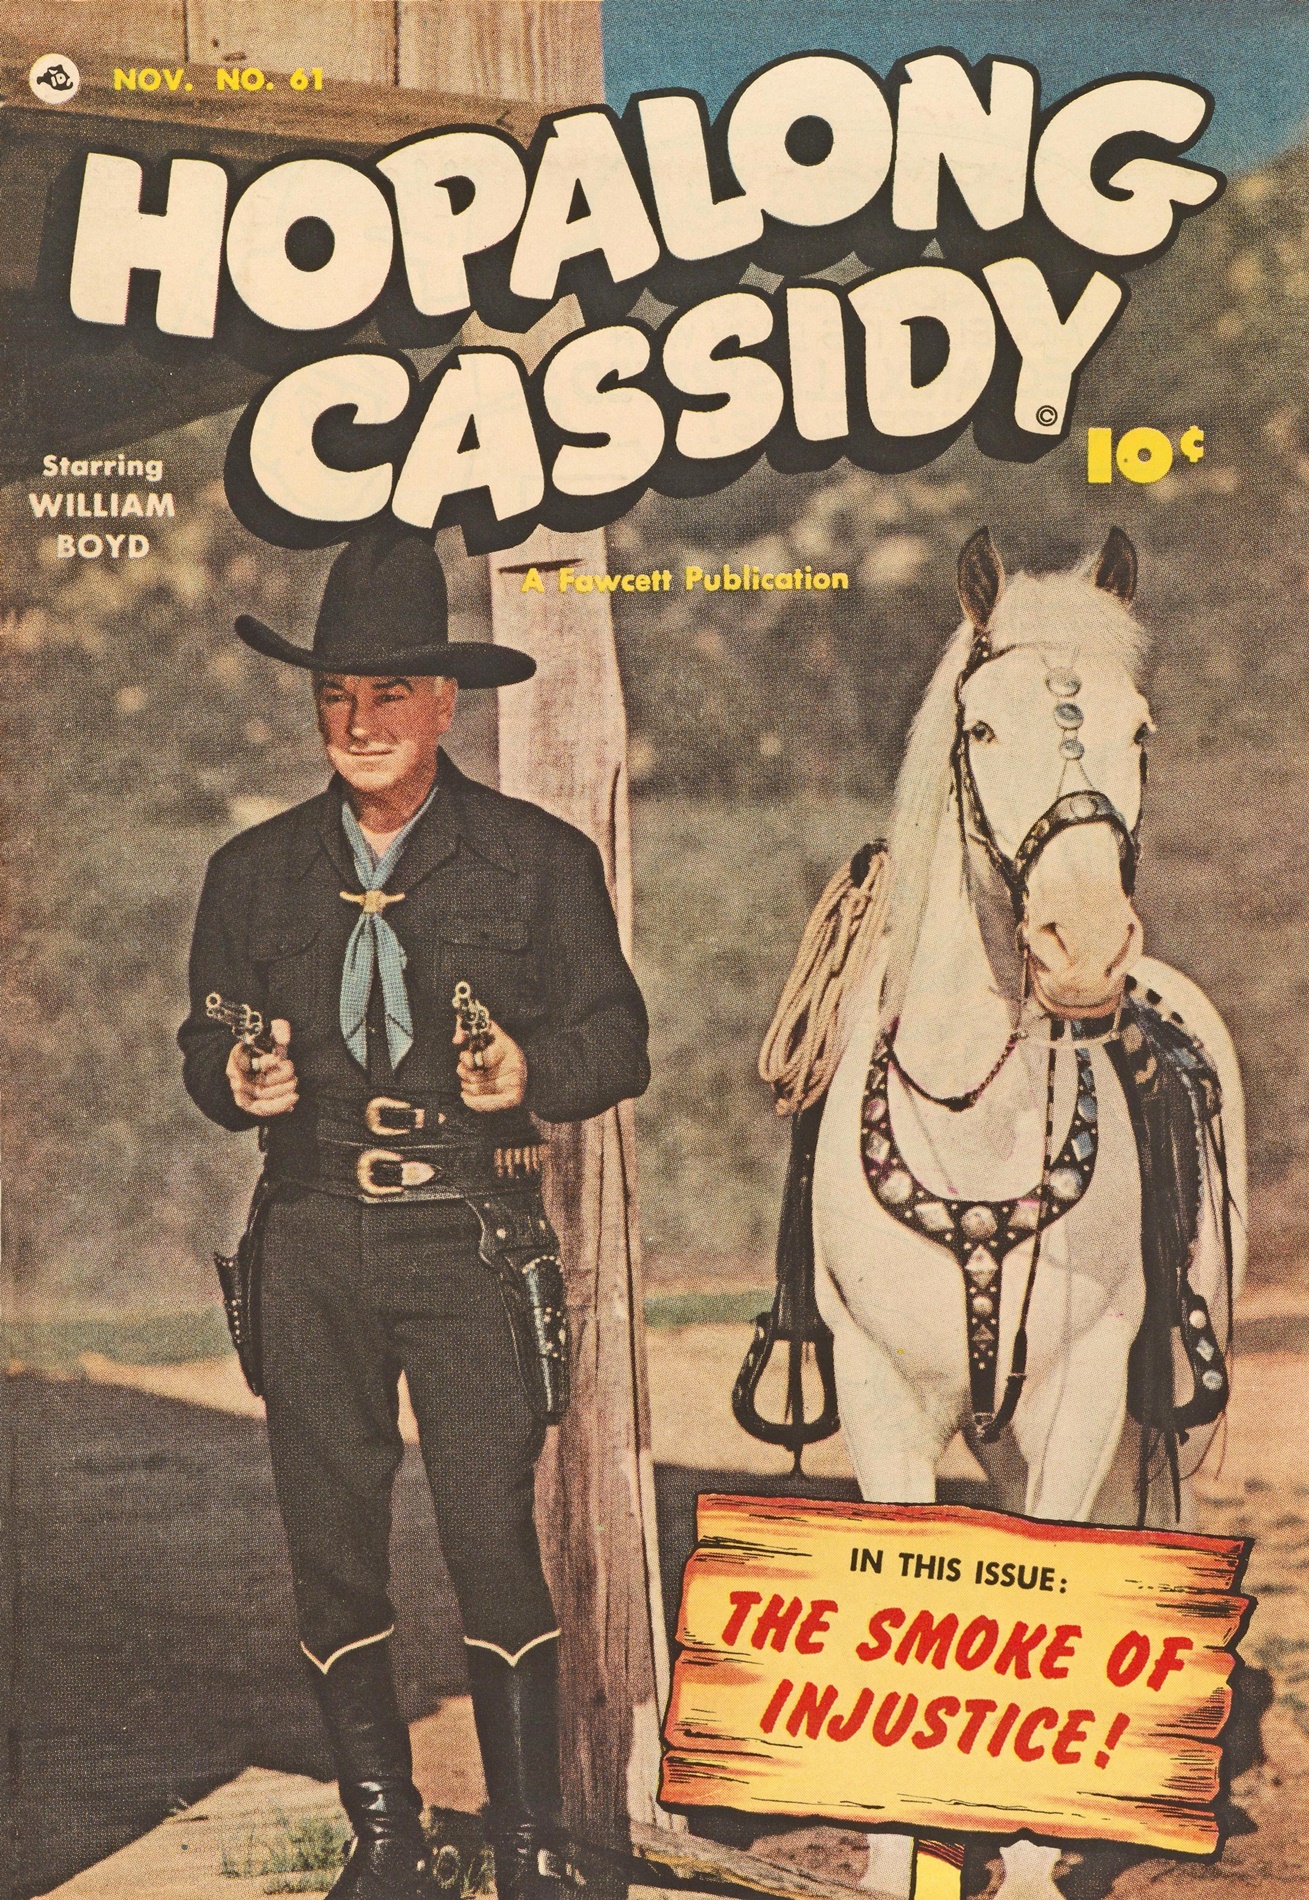 Read online Hopalong Cassidy comic -  Issue #61 - 1